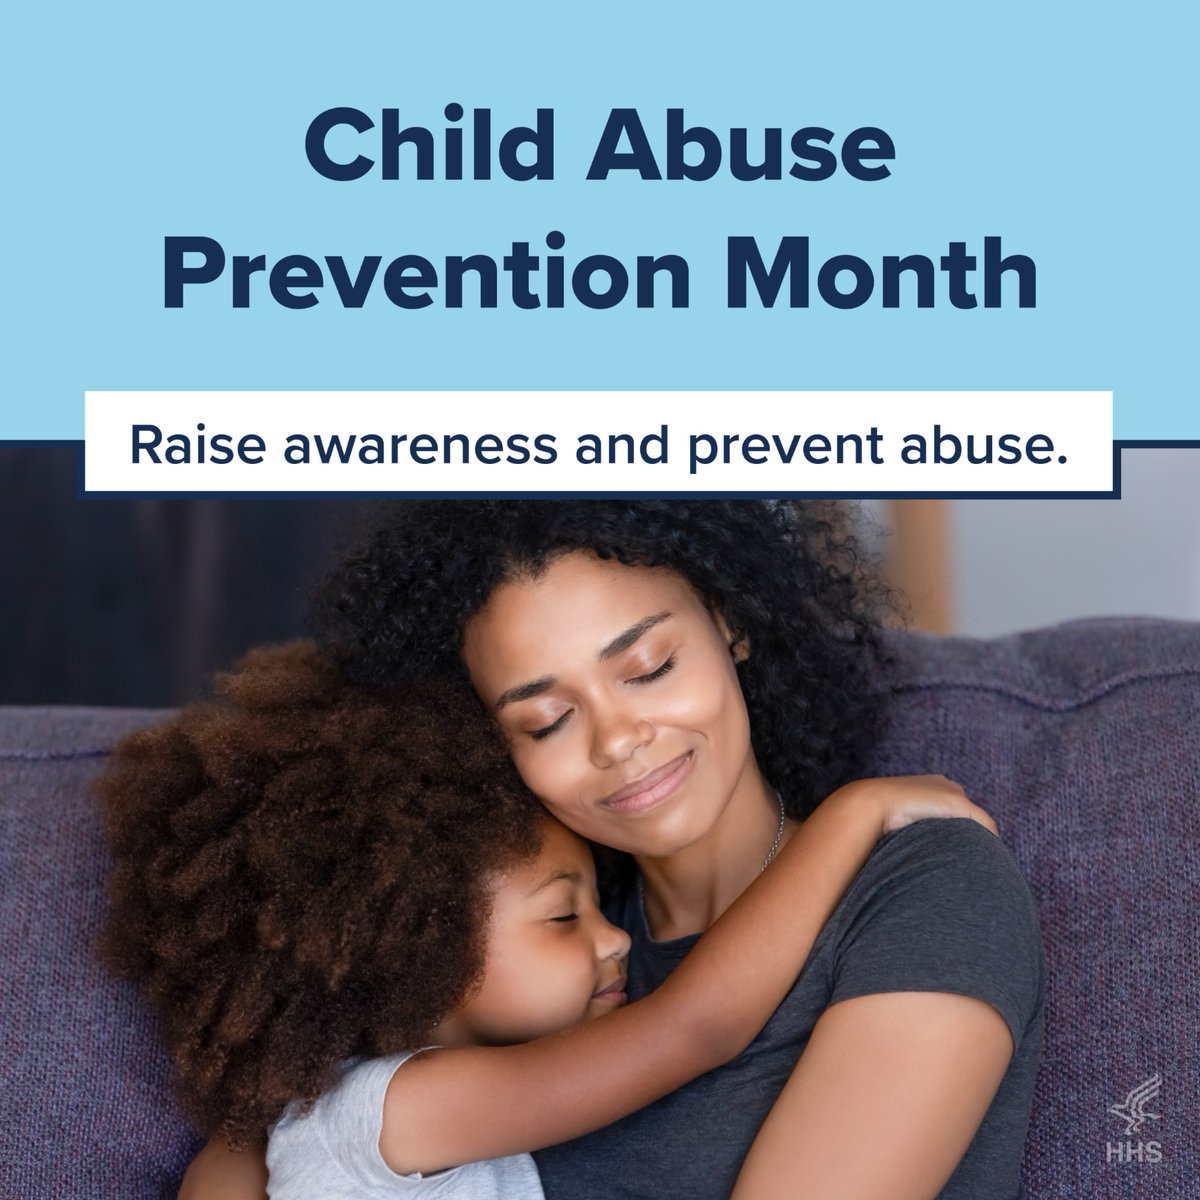 Every child deserves a safe and nurturing environment. April is Child Abuse Prevention Month, a great time to speak up and raise awareness for how we can create a safer environment for every child. Find resources to share with loved ones at bit.ly/43Ul40A.